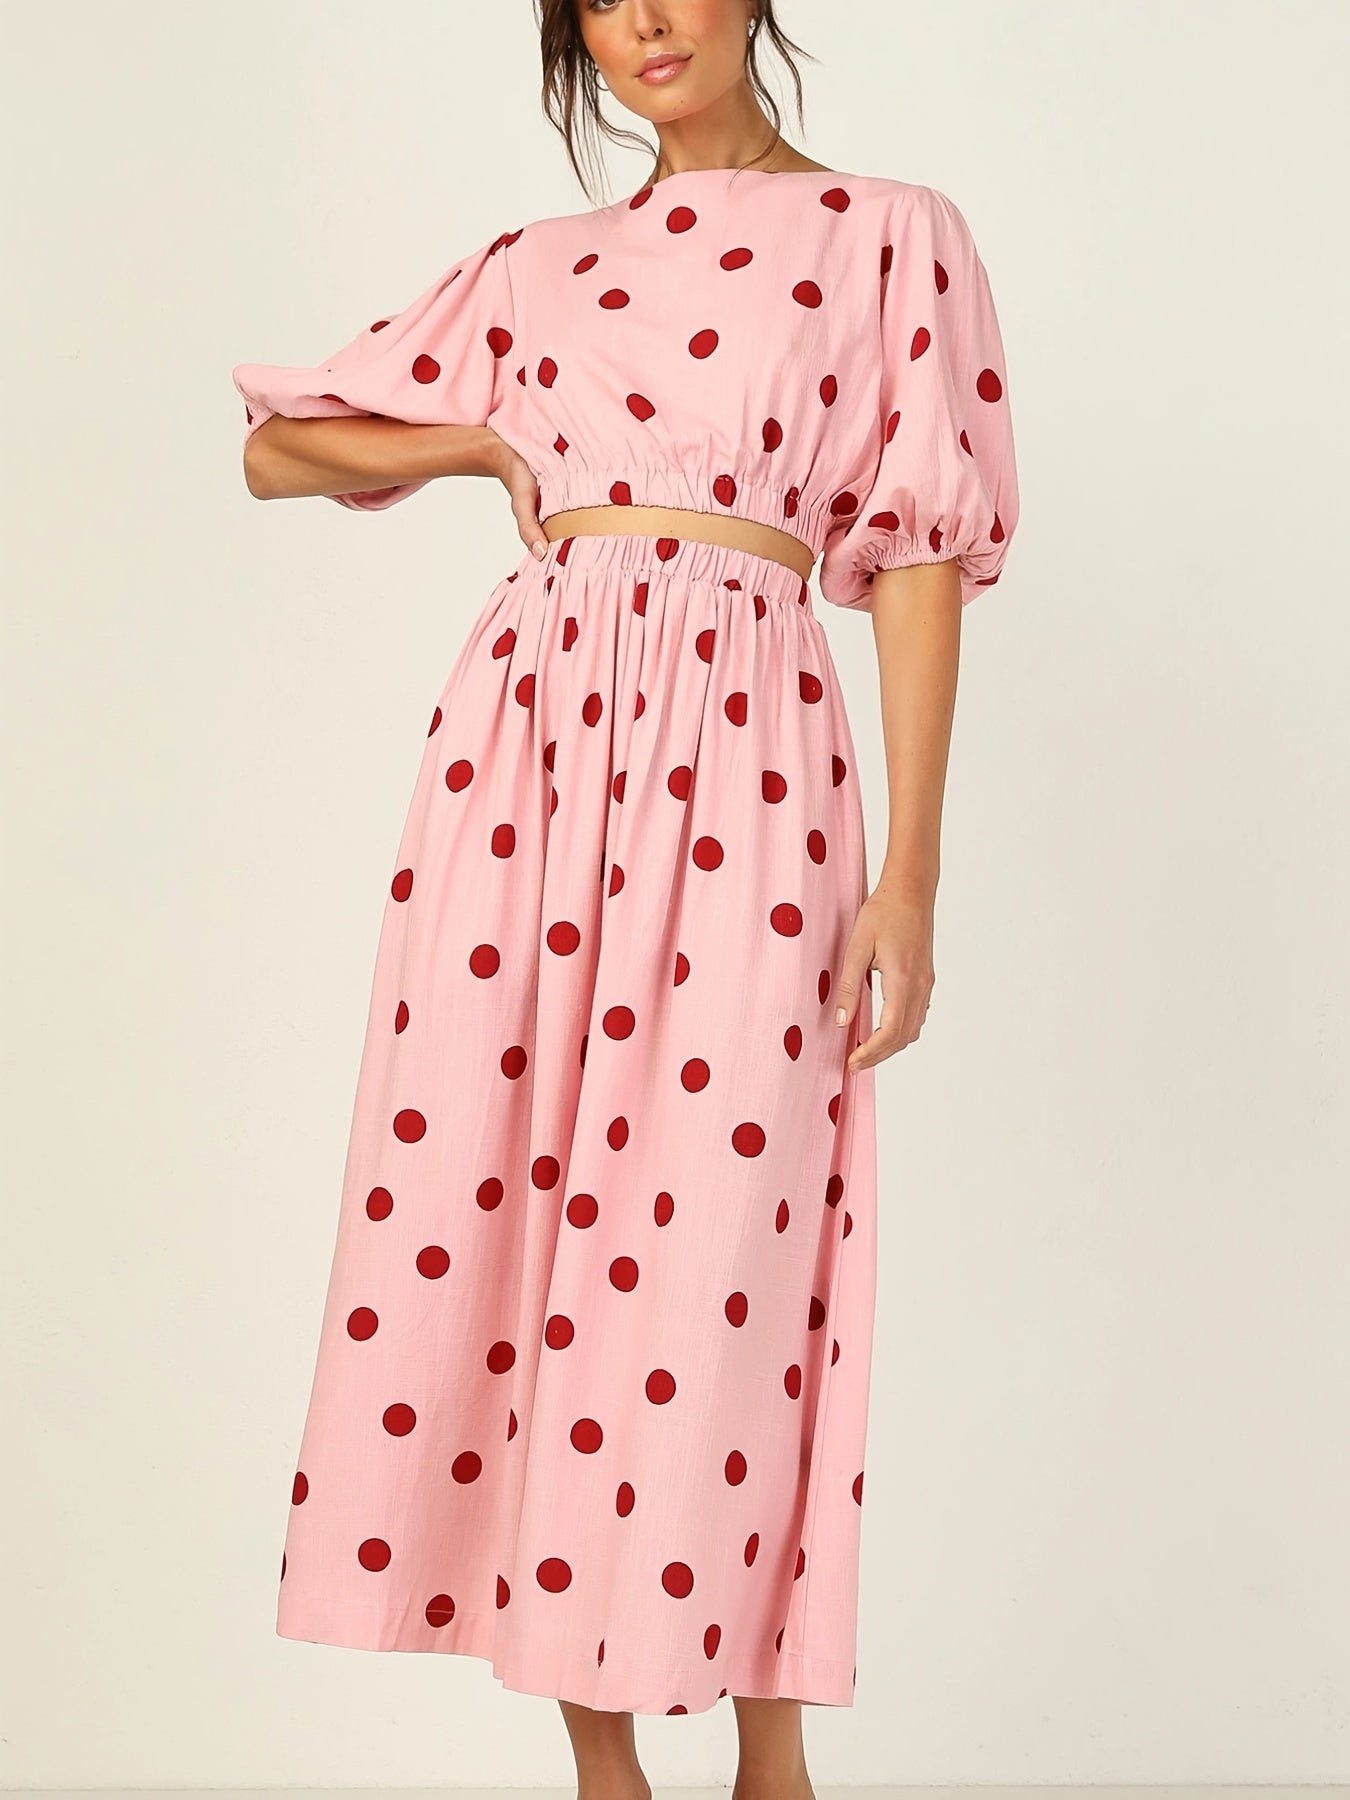 Antmvs Valentine's Day Sexy Pink Polka Dot Dresses Two-piece Set, Crew Neck Short Sleeve Tops & Long Skirt Set, Women's Clothing